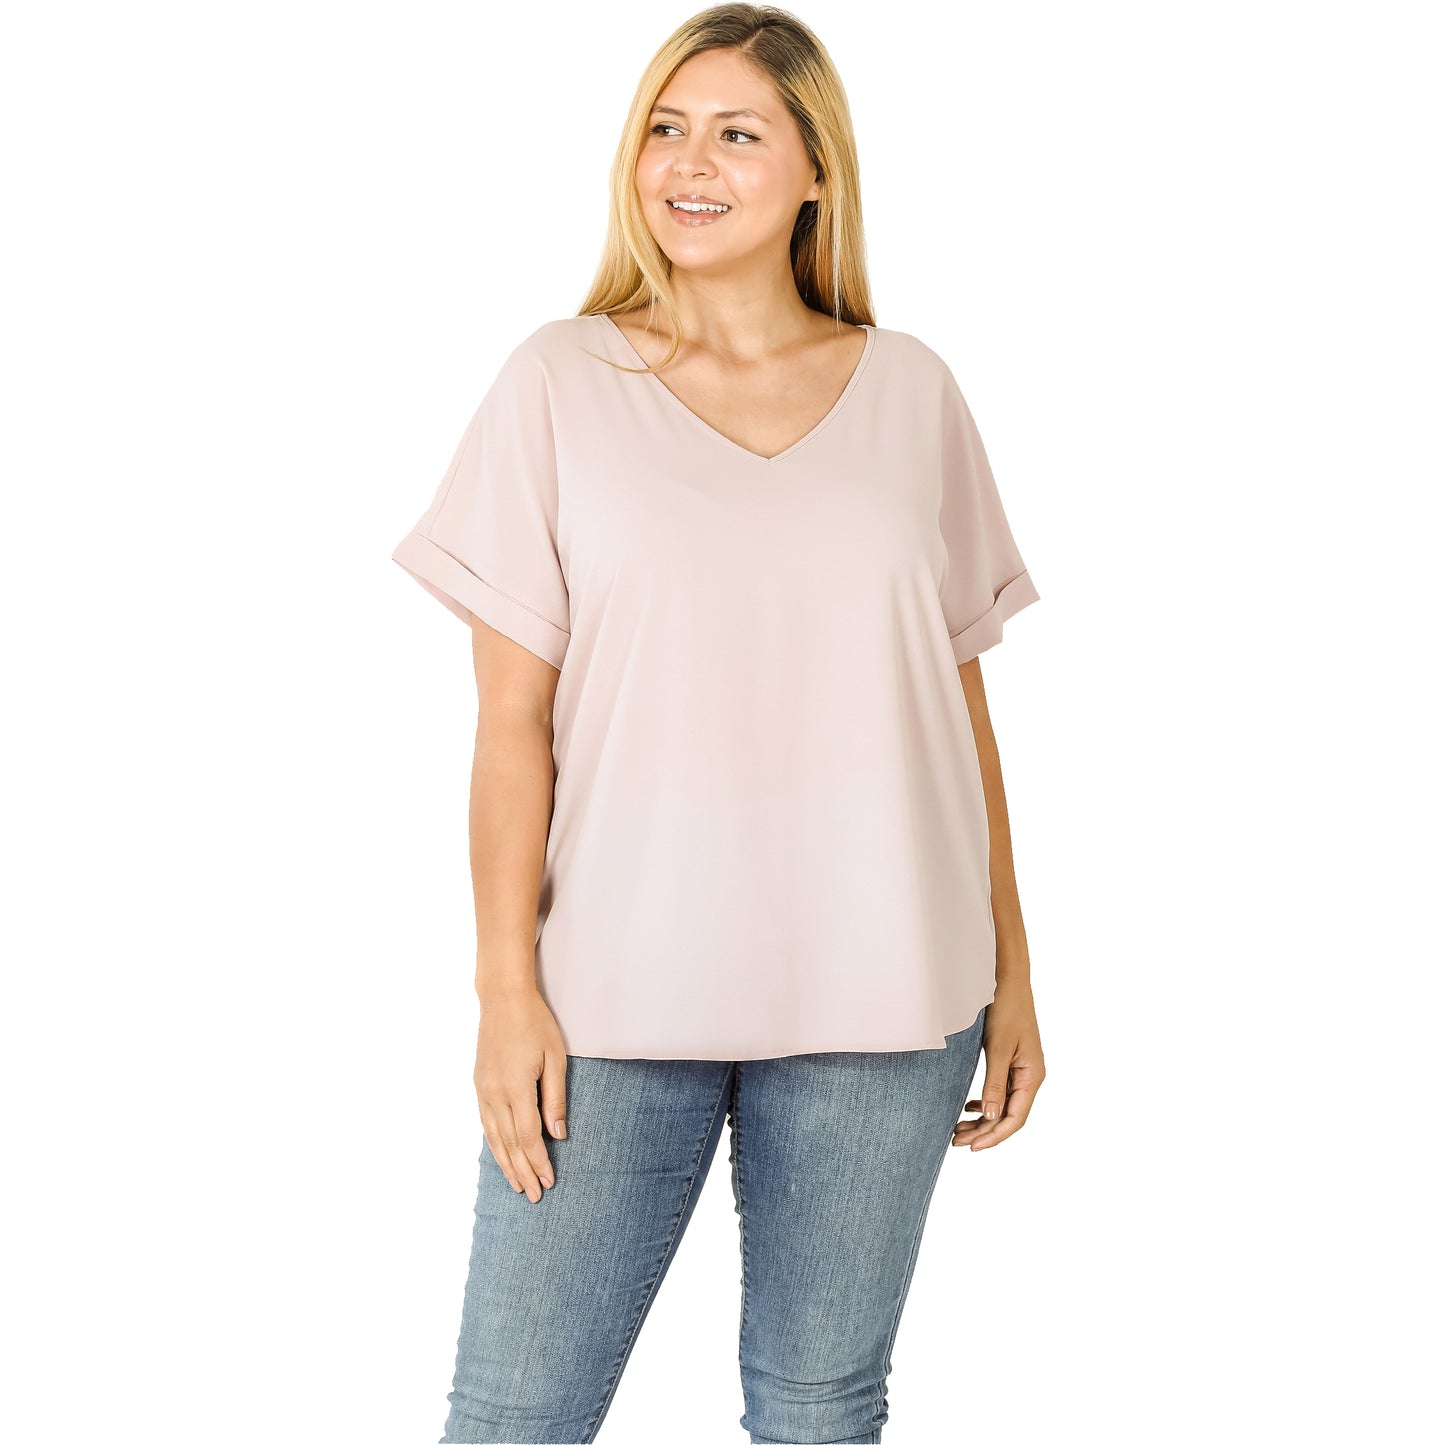 Rolled Sleeve V-Neck Top- Plus Size